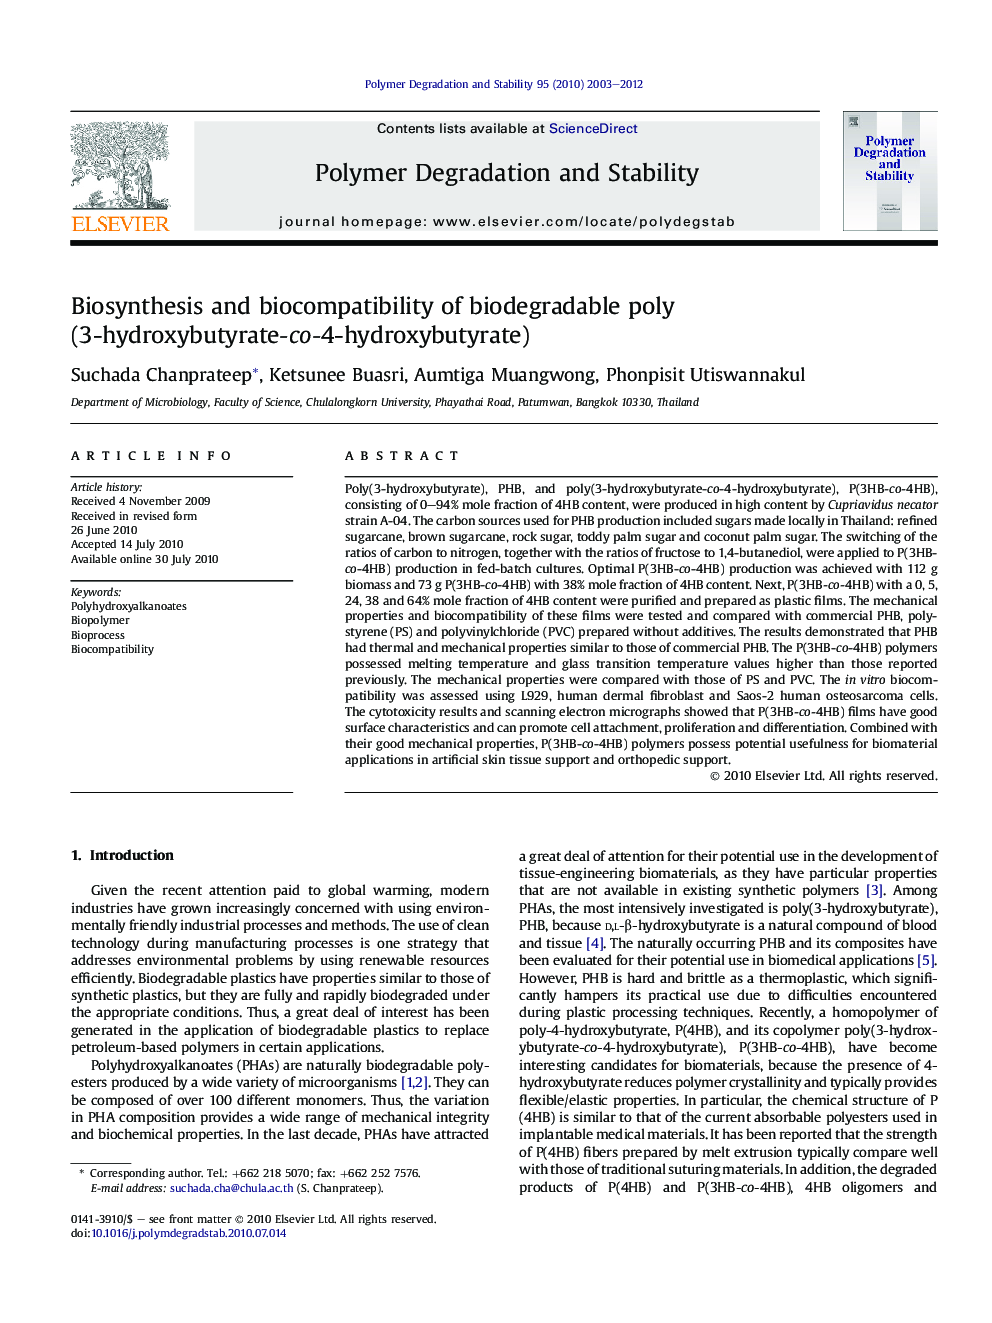 Biosynthesis and biocompatibility of biodegradable poly(3-hydroxybutyrate-co-4-hydroxybutyrate)